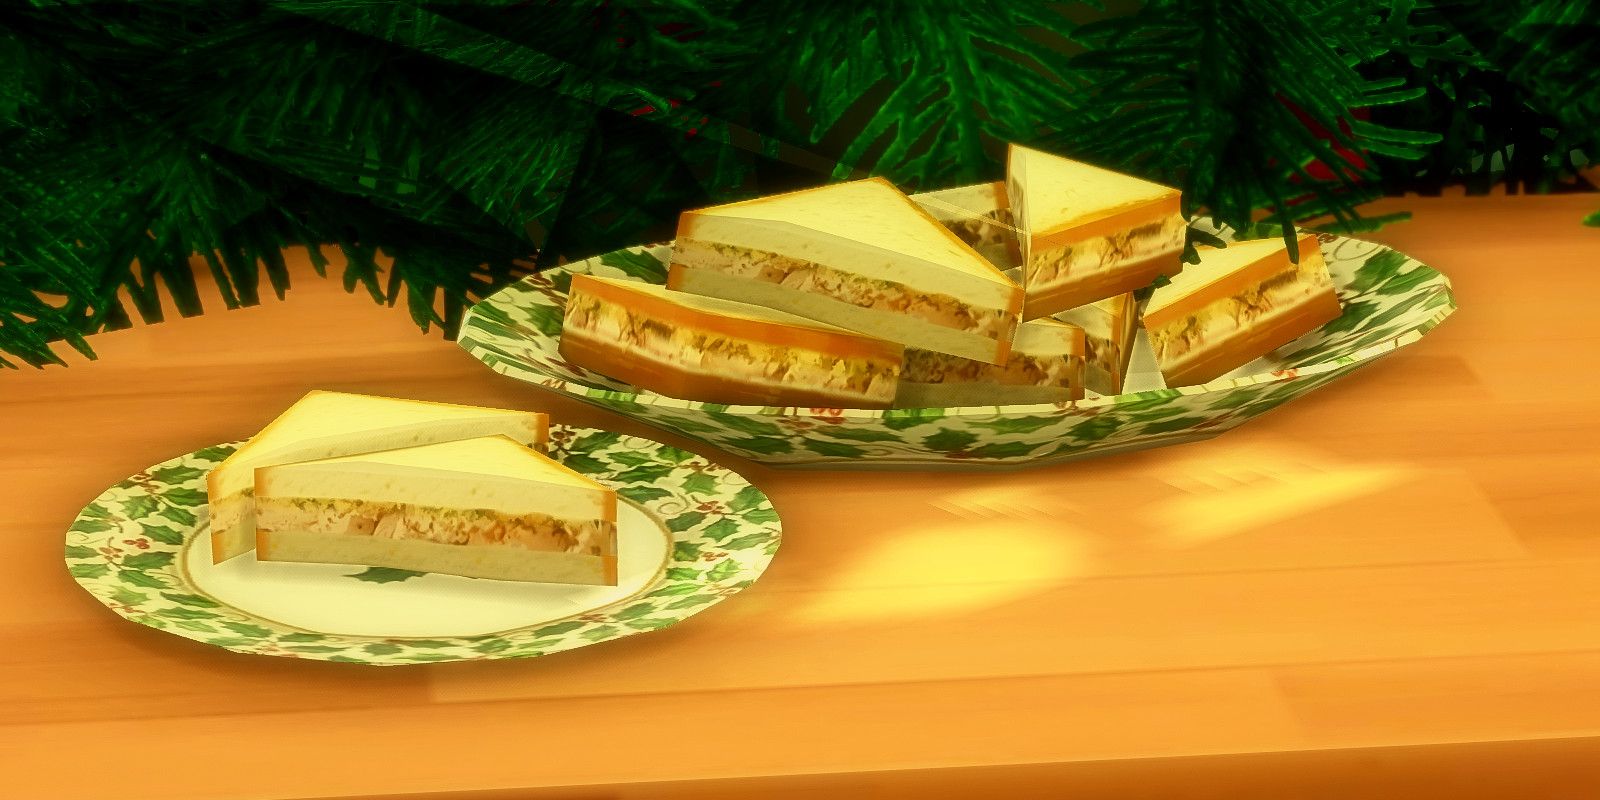 A plate full of sandwiches made of holiday leftovers in The Sims 4